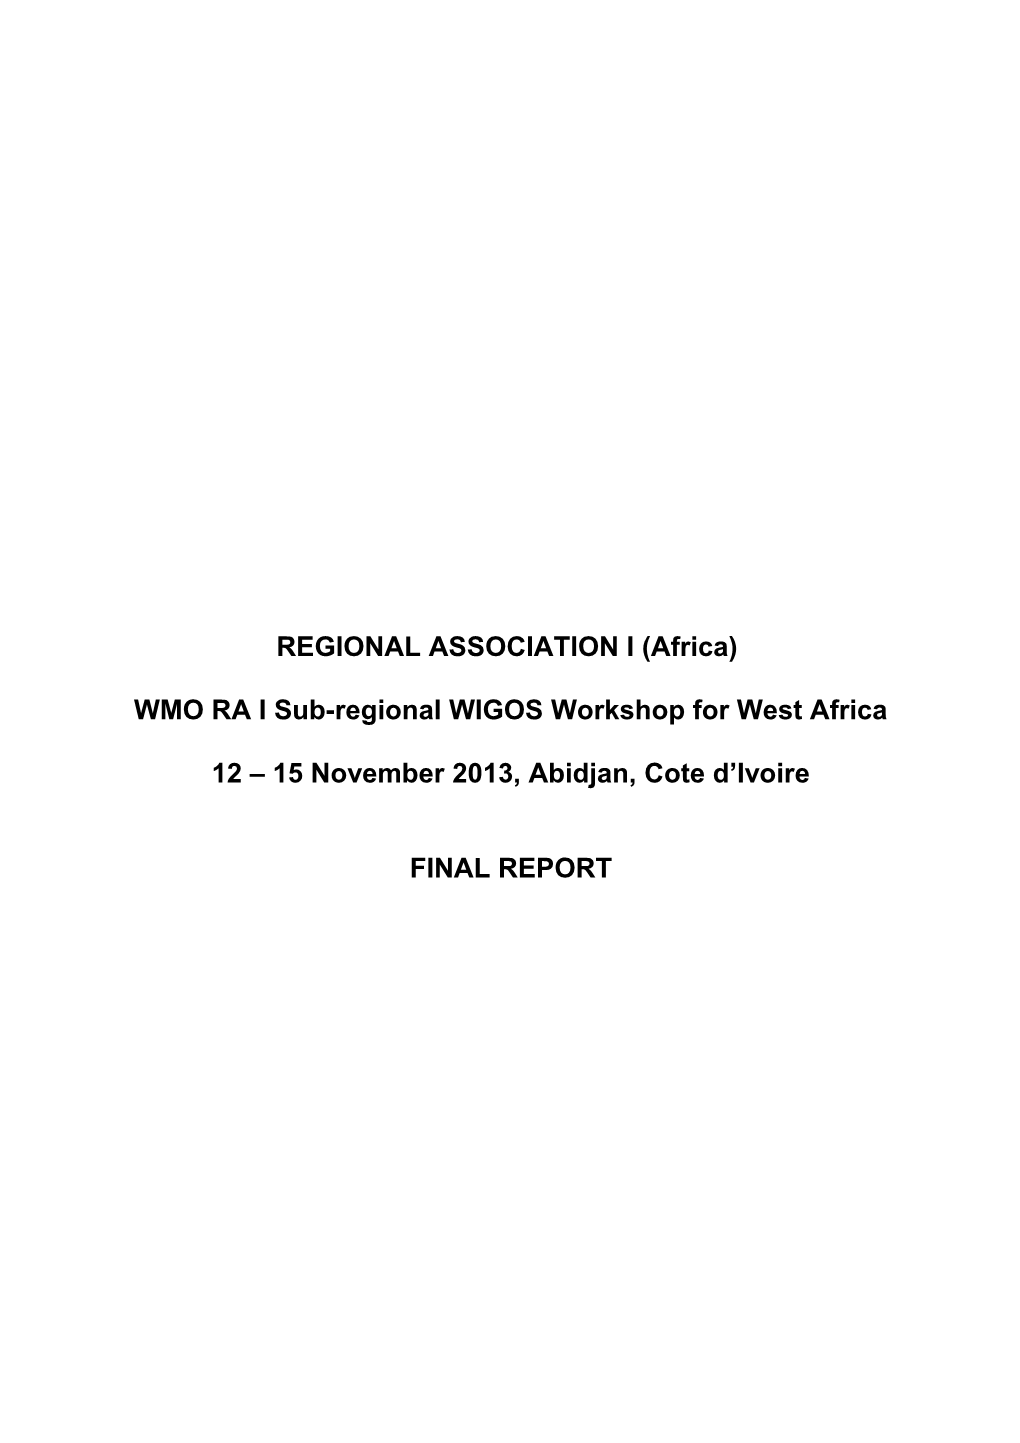 Ra-I Task Force on Wigos Implementation in Ra-I